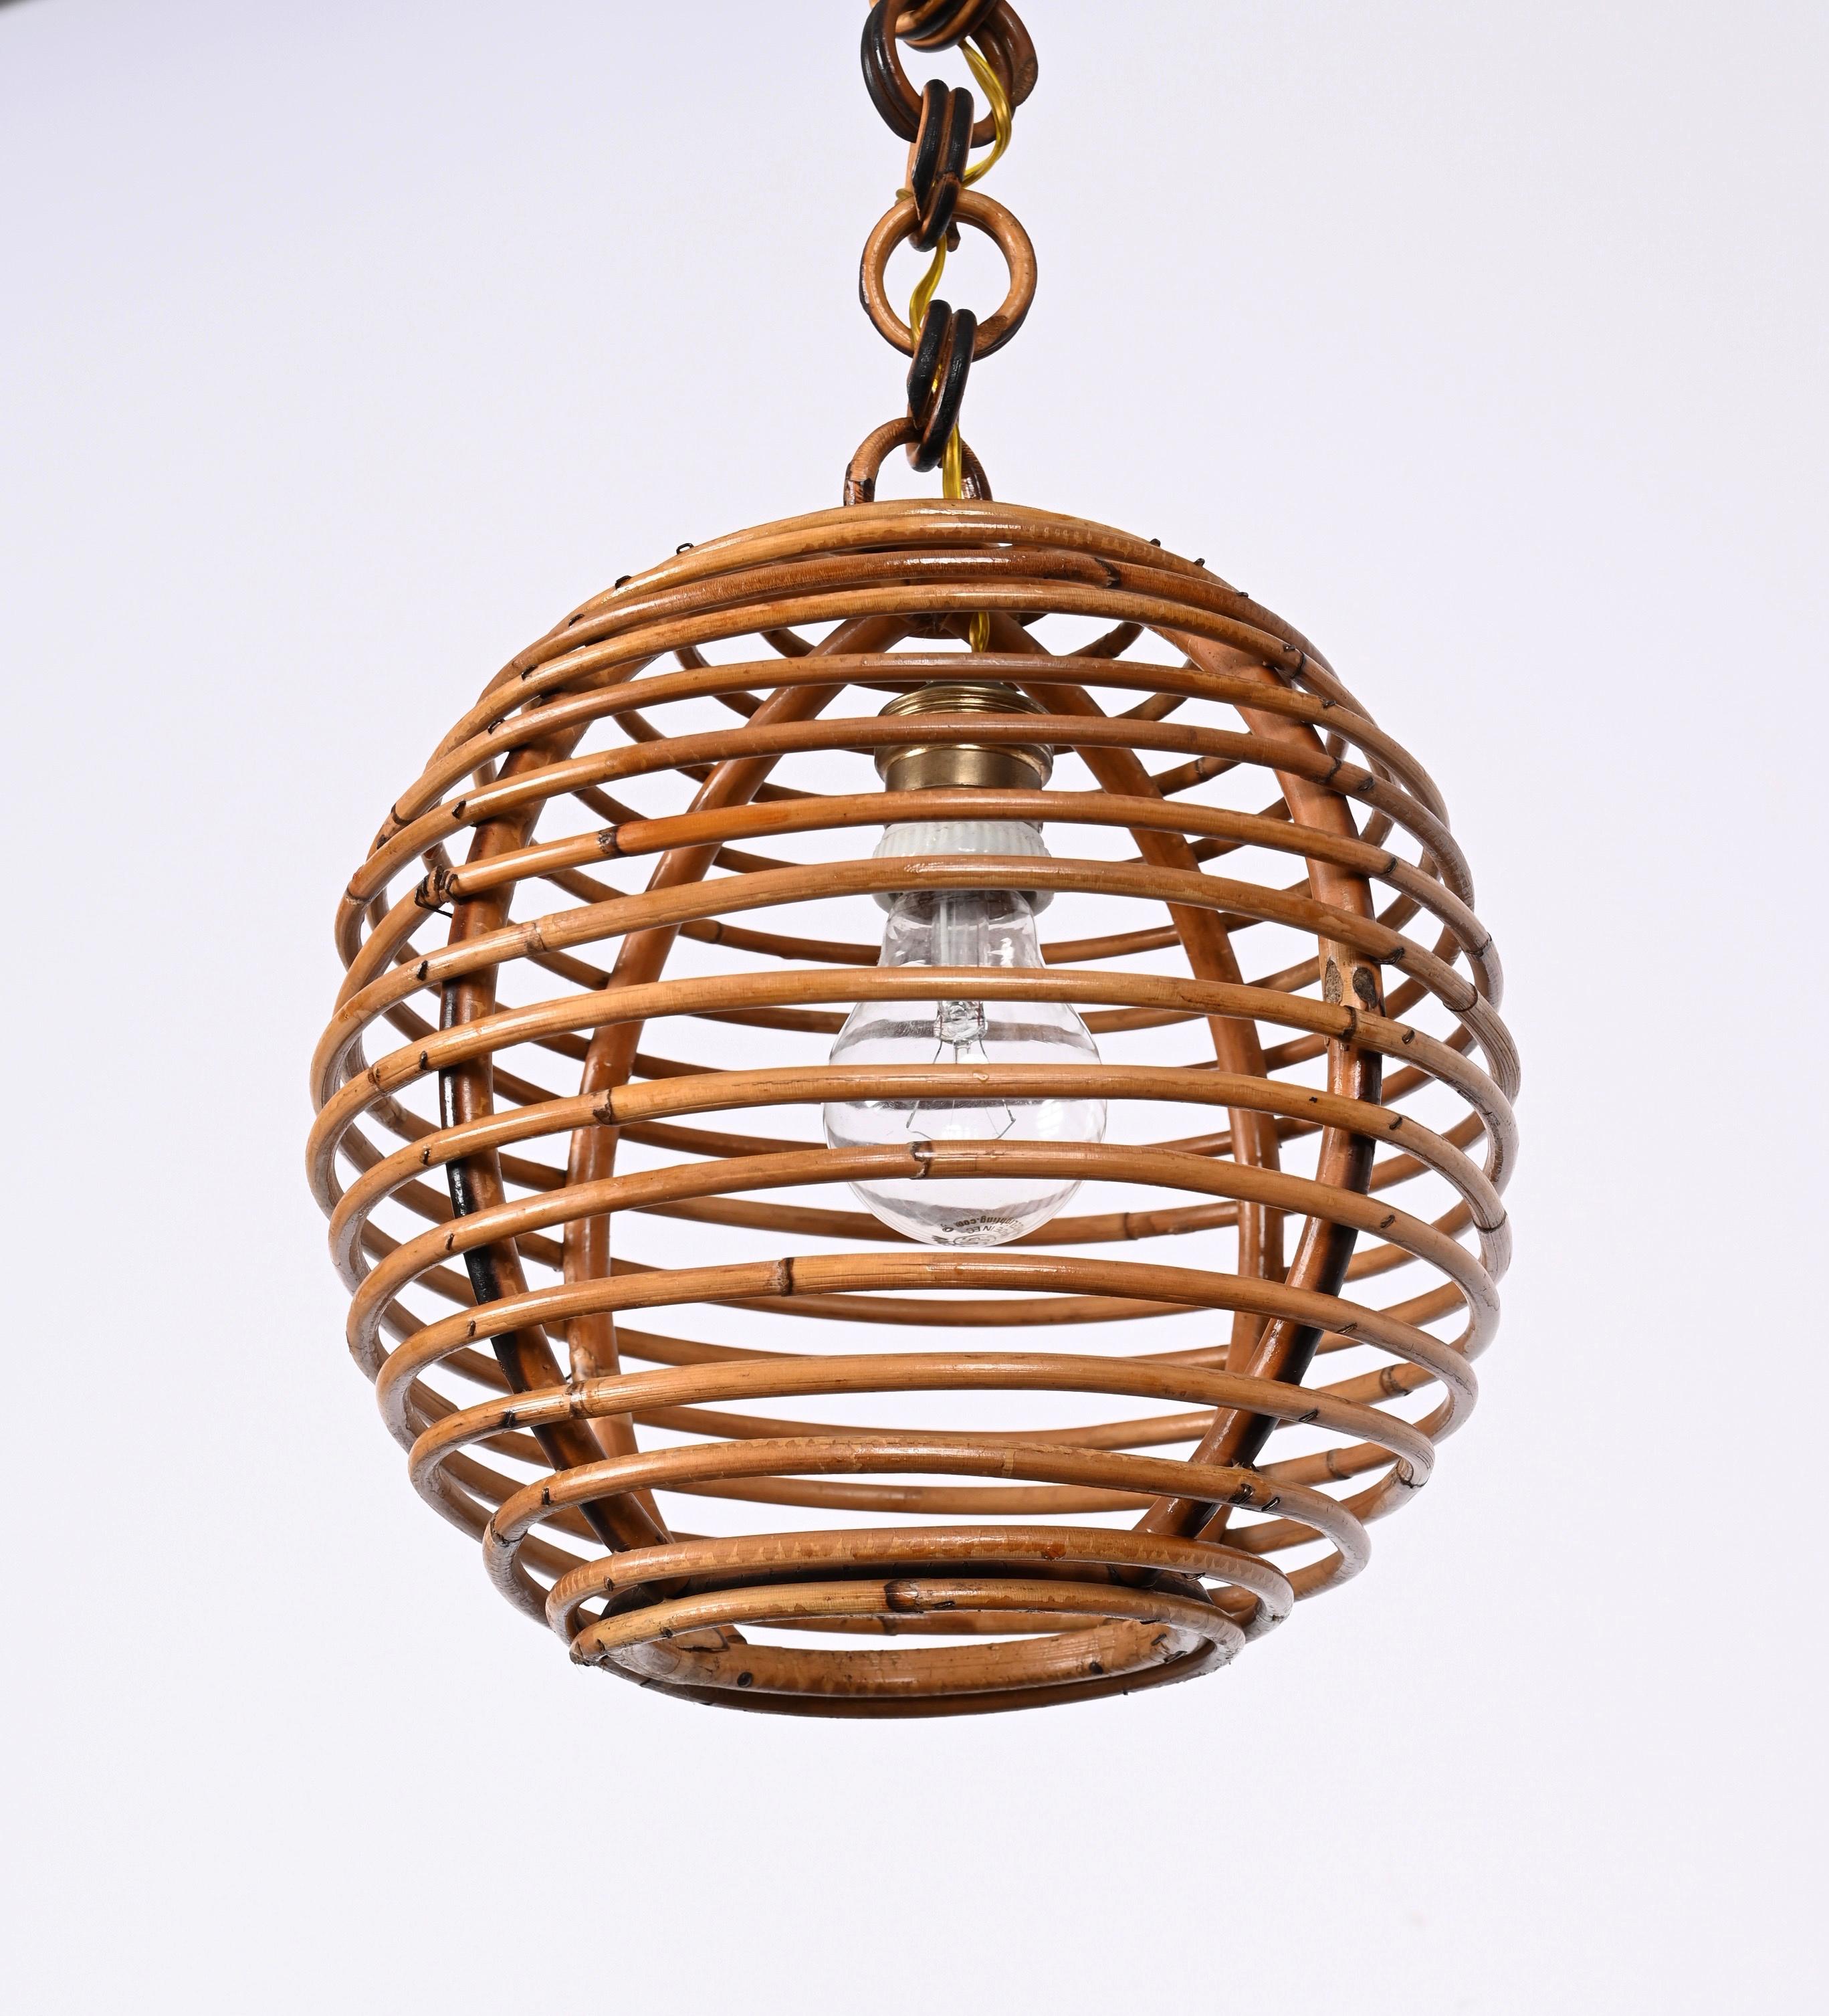 Midcentury French Riviera Bambo and Rattan Spherical Italian Chandelier, 1960s For Sale 5